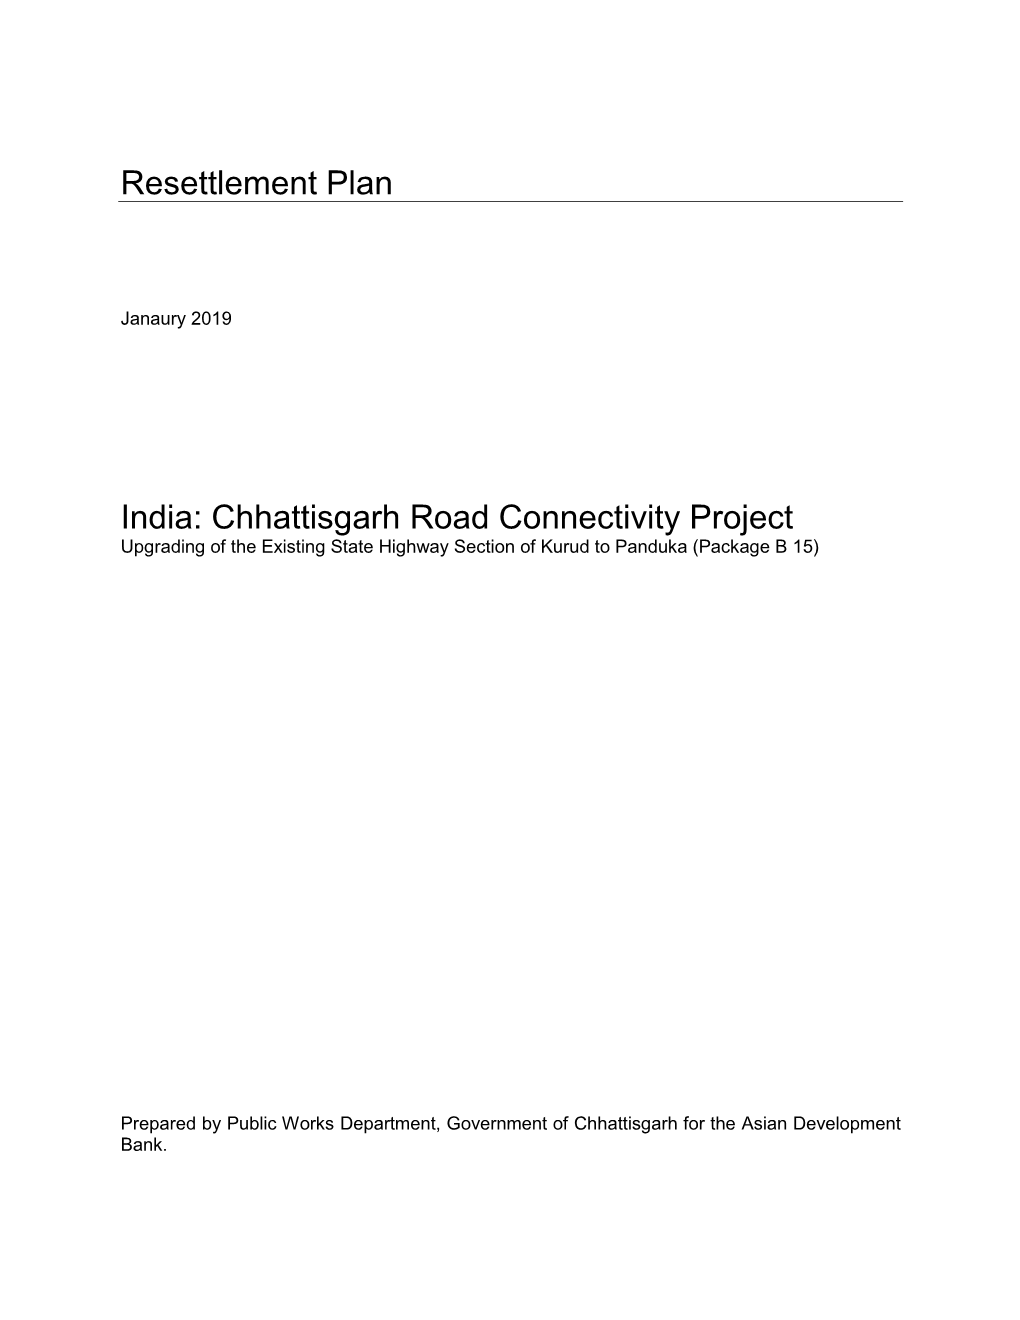 Chhattisgarh Road Connectivity Project Upgrading of the Existing State Highway Section of Kurud to Panduka (Package B 15)